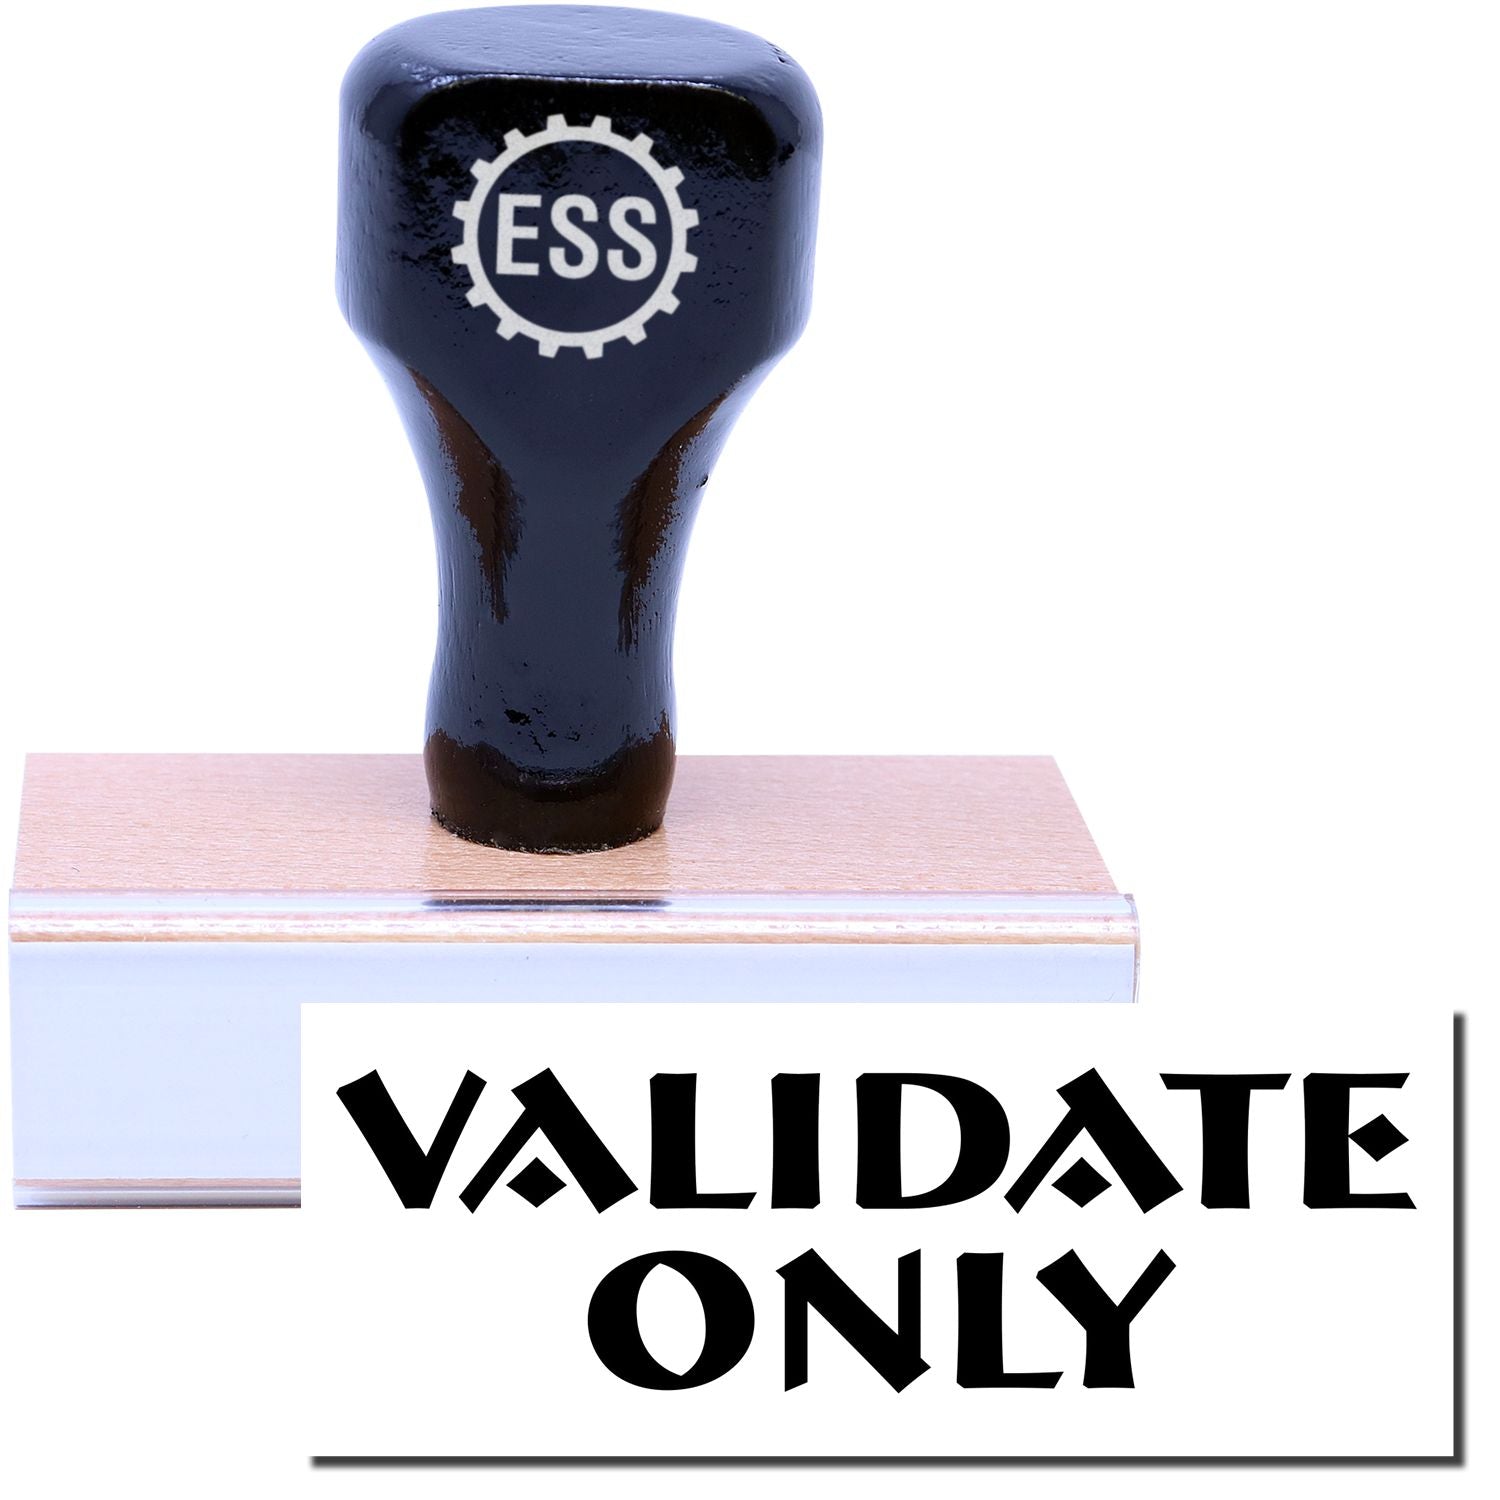 A stock office rubber stamp with a stamped image showing how the text "VALIDATE ONLY" is displayed after stamping.